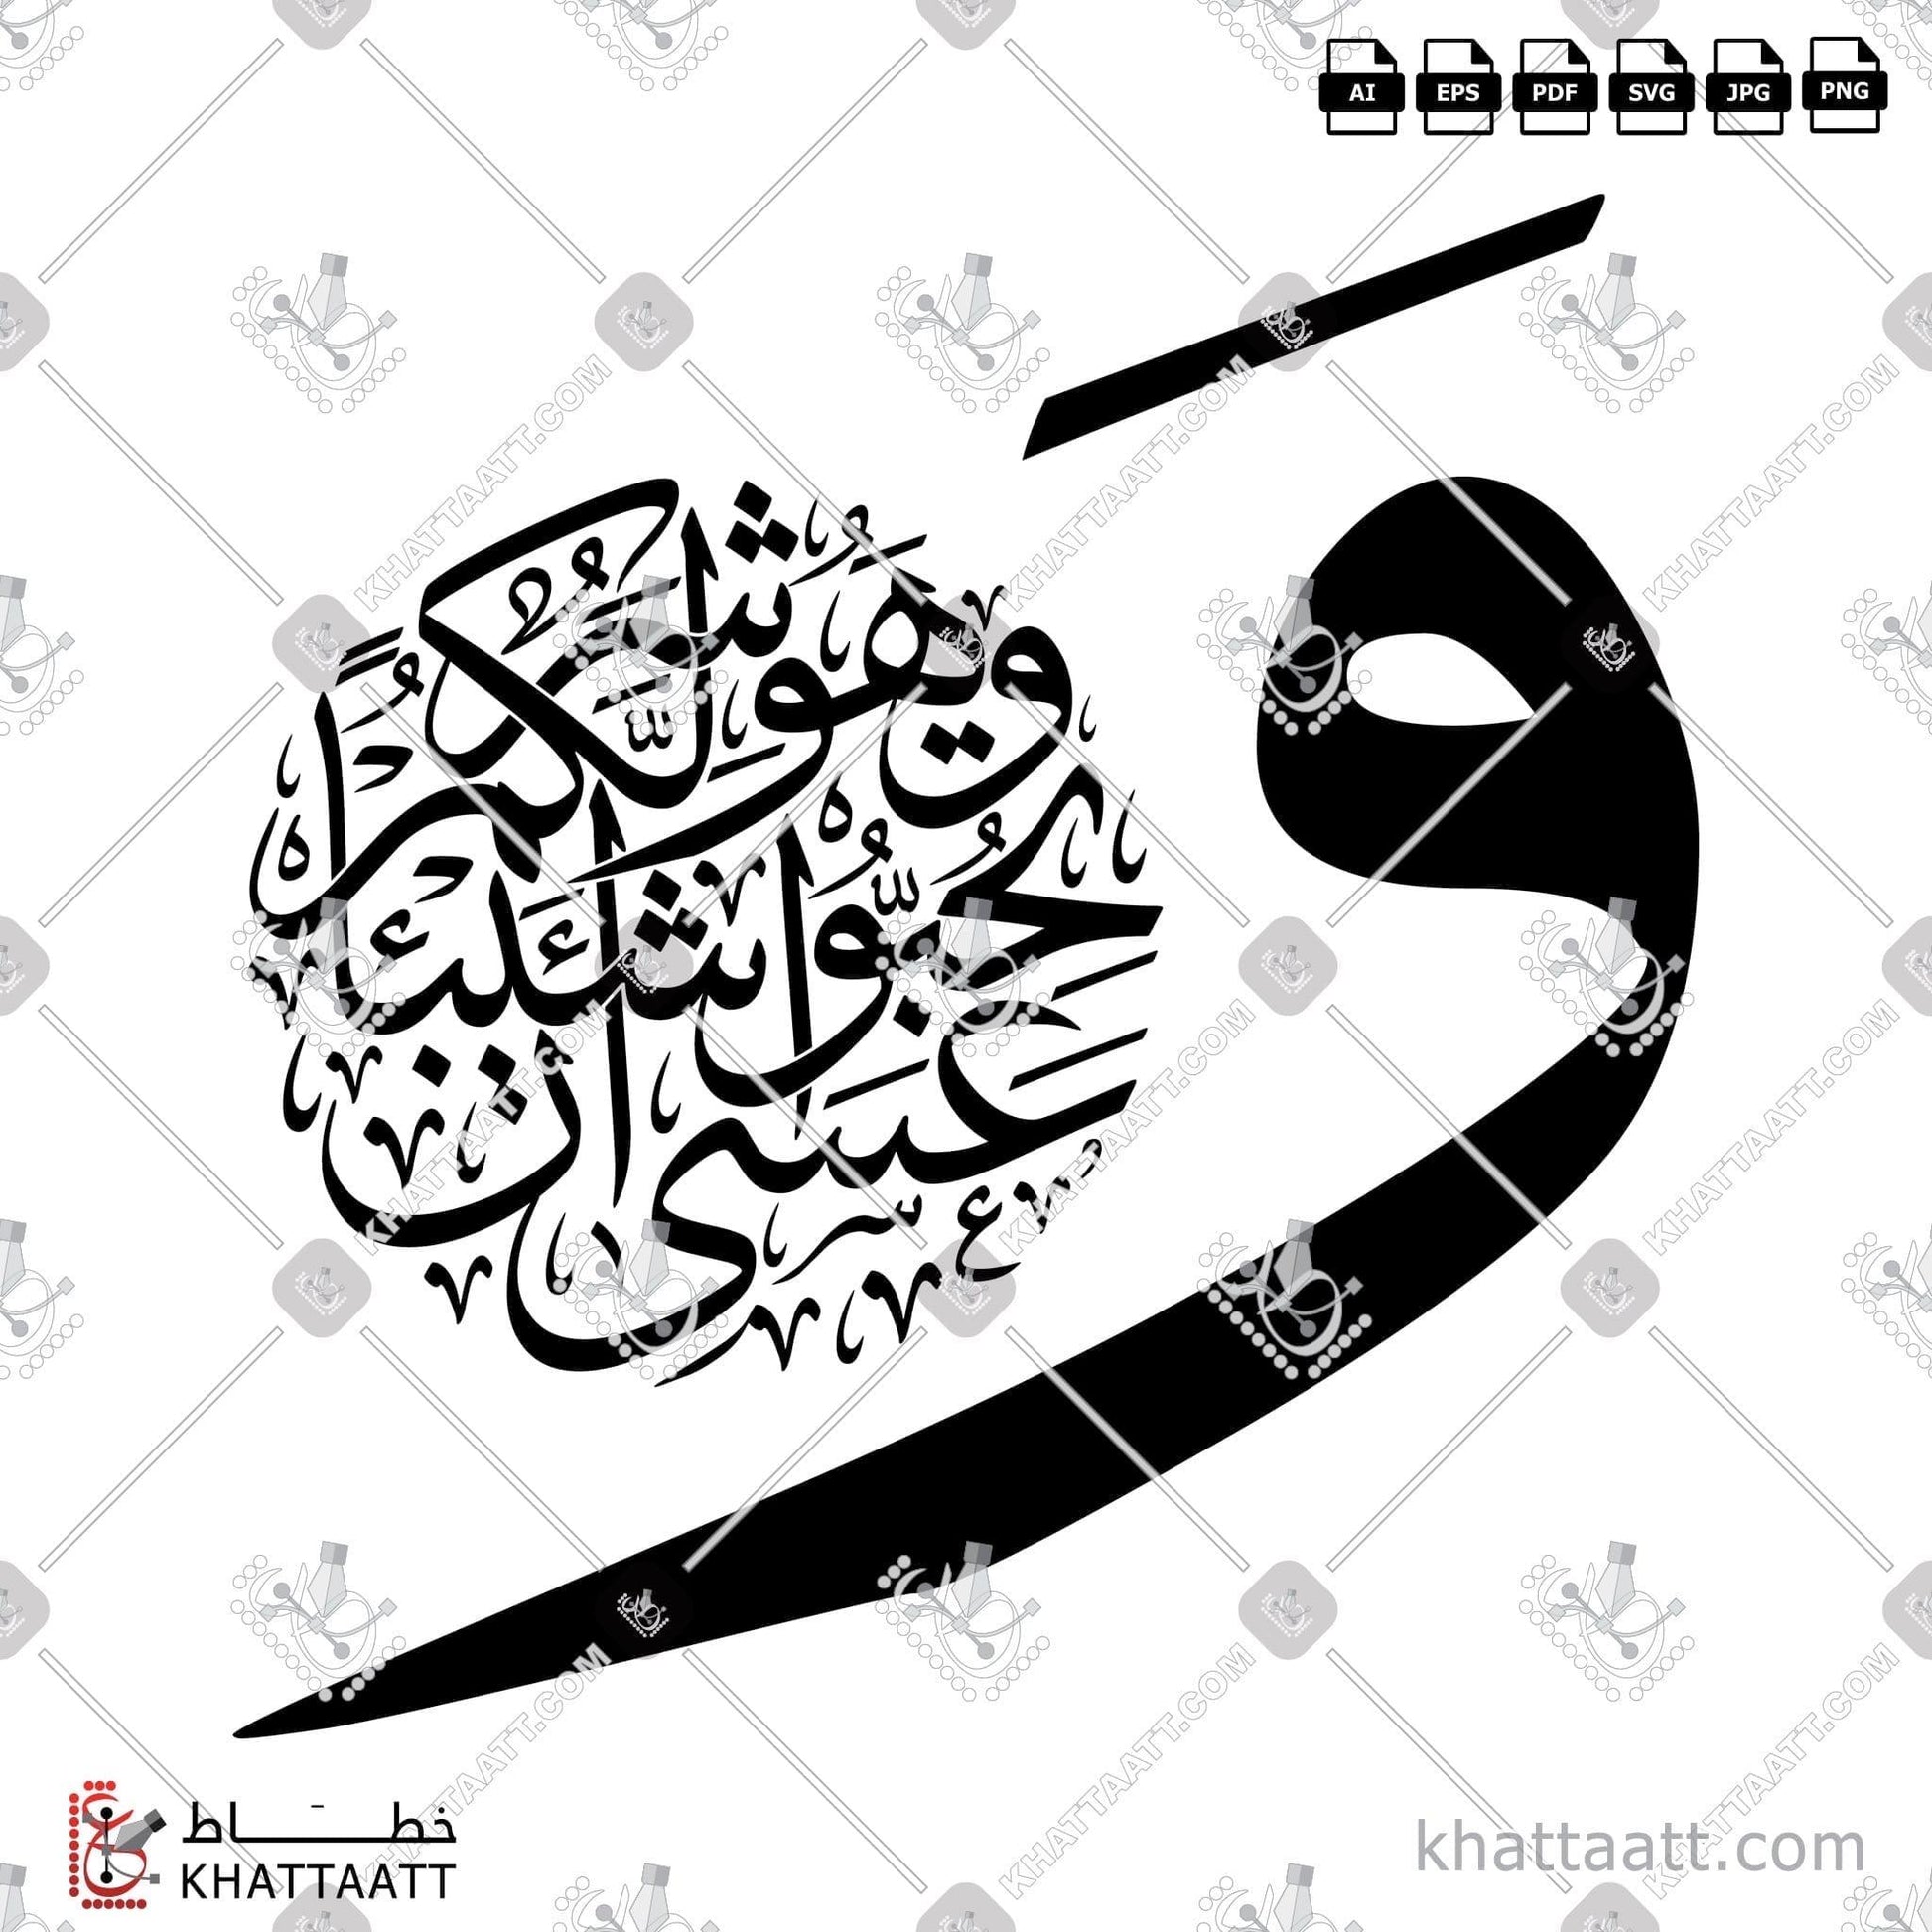 Download Arabic Calligraphy of وعسى أن تحبوا شيئا وهو شر لكم in Thuluth - خط الثلث in vector and .png